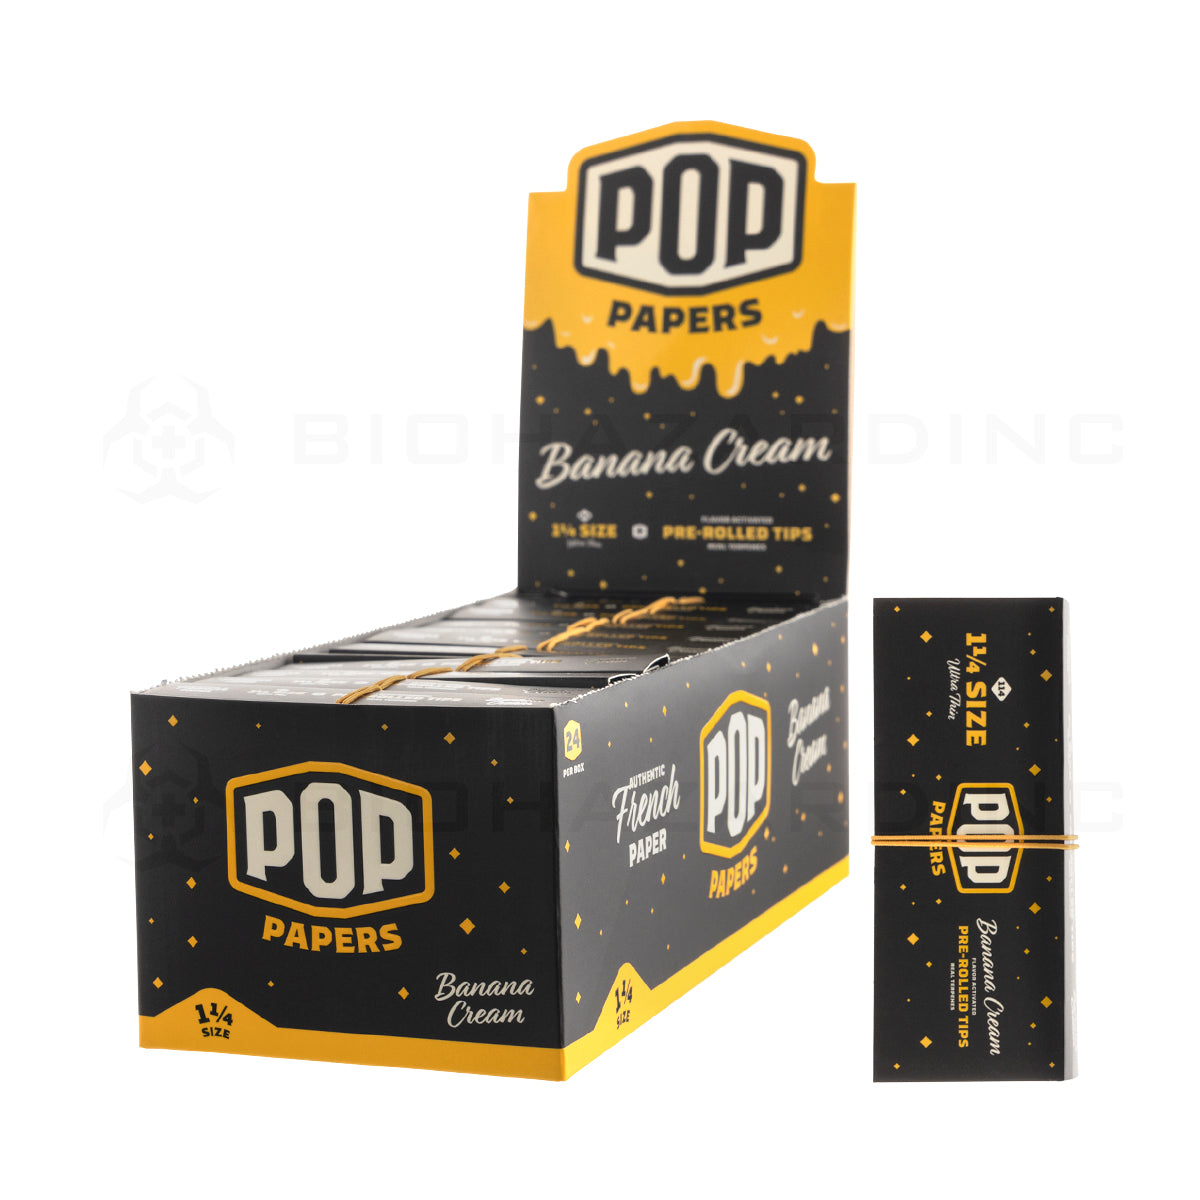 Pop Papers | Wholesale Ultra Thin 1¼ Rolling Paper w/ Flavor Filter Tips | 78mm - 24 Count - Various Flavors Rolling Papers Biohazard Inc Banana Cream  